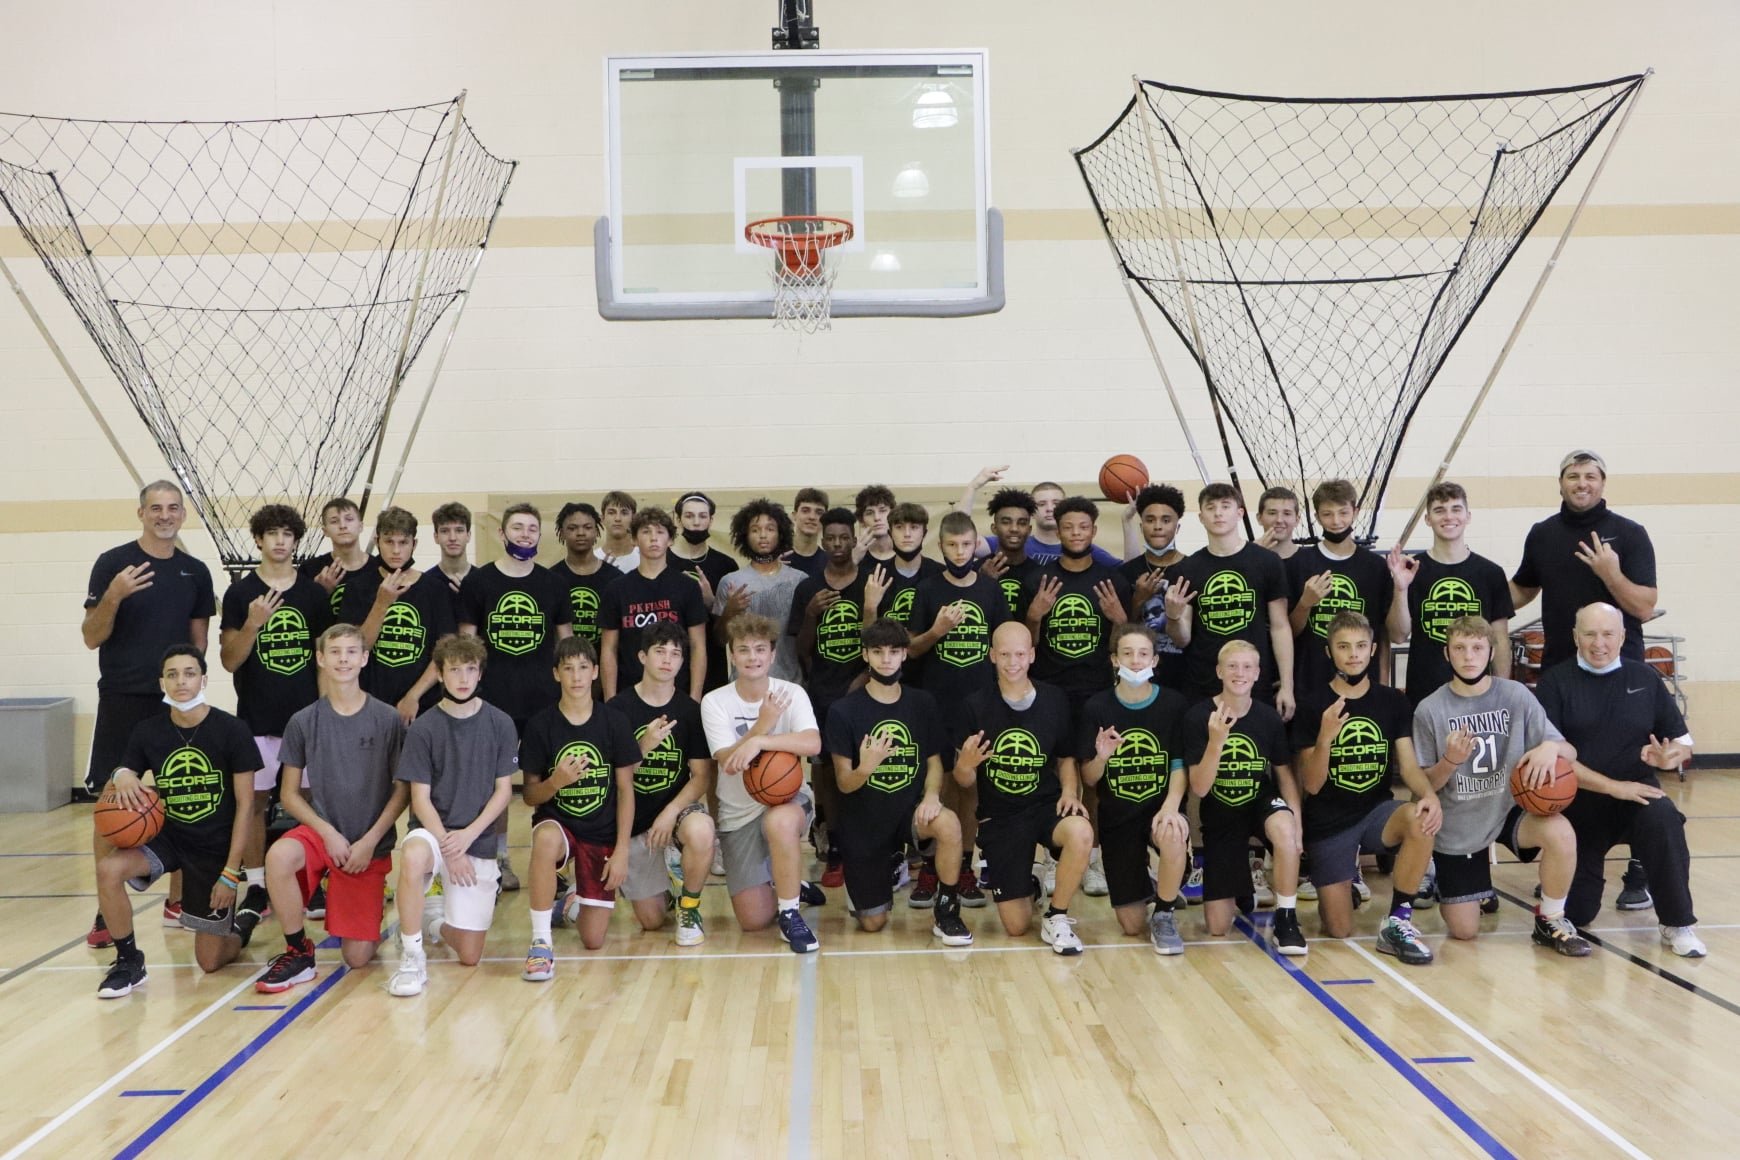 Best New Mexico Basketball Camps, Best Basketball Summer Camps .com